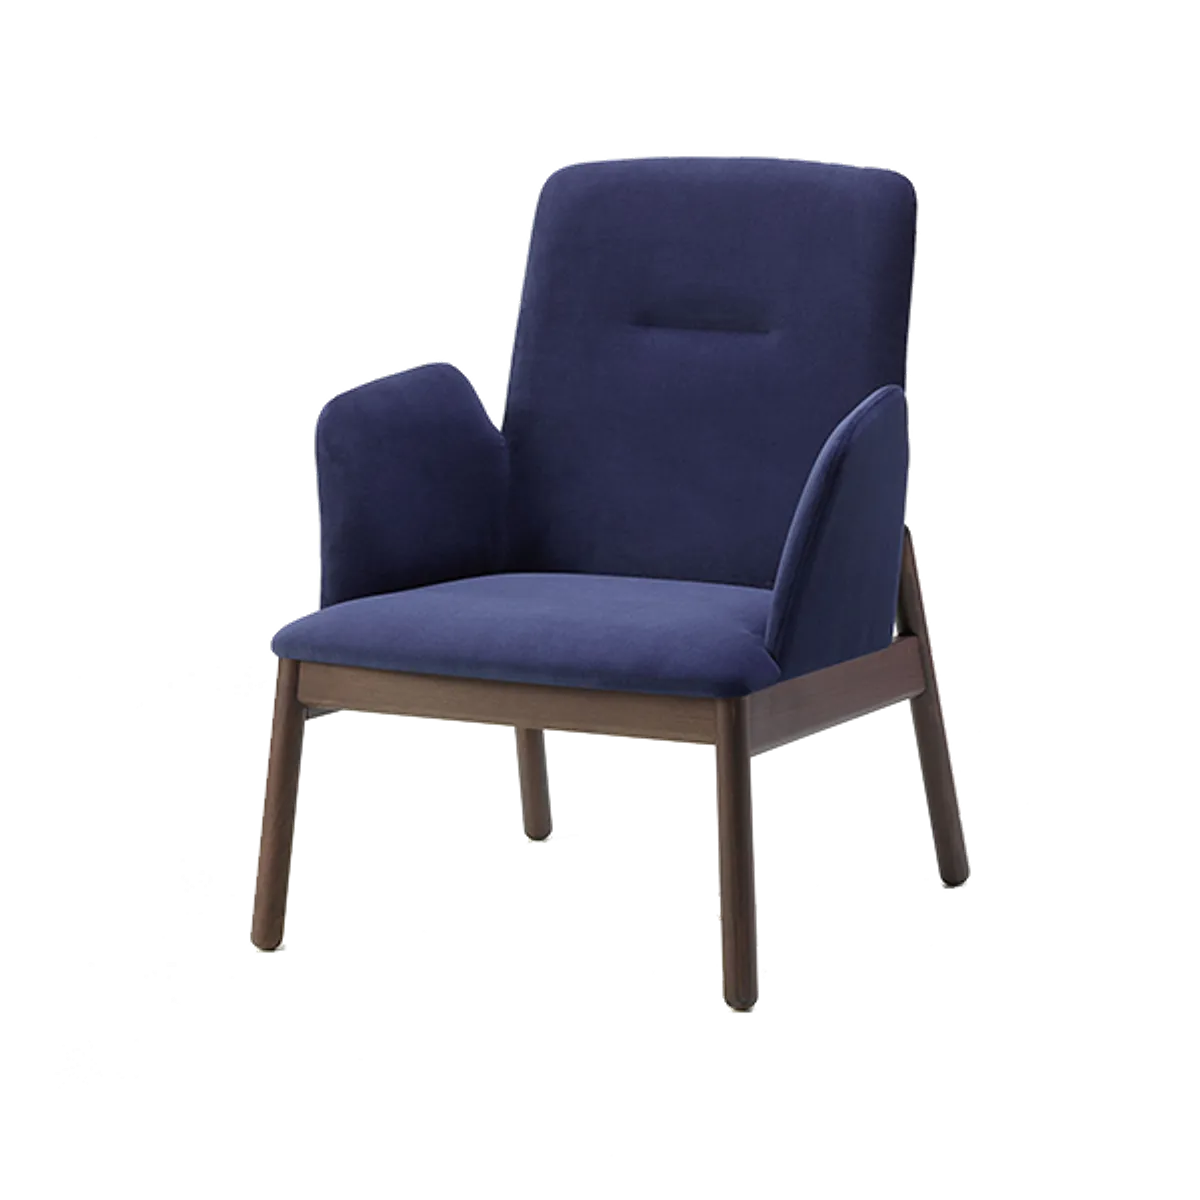 Norma Lounge Chair 5 09 0 Inside Out Contracts